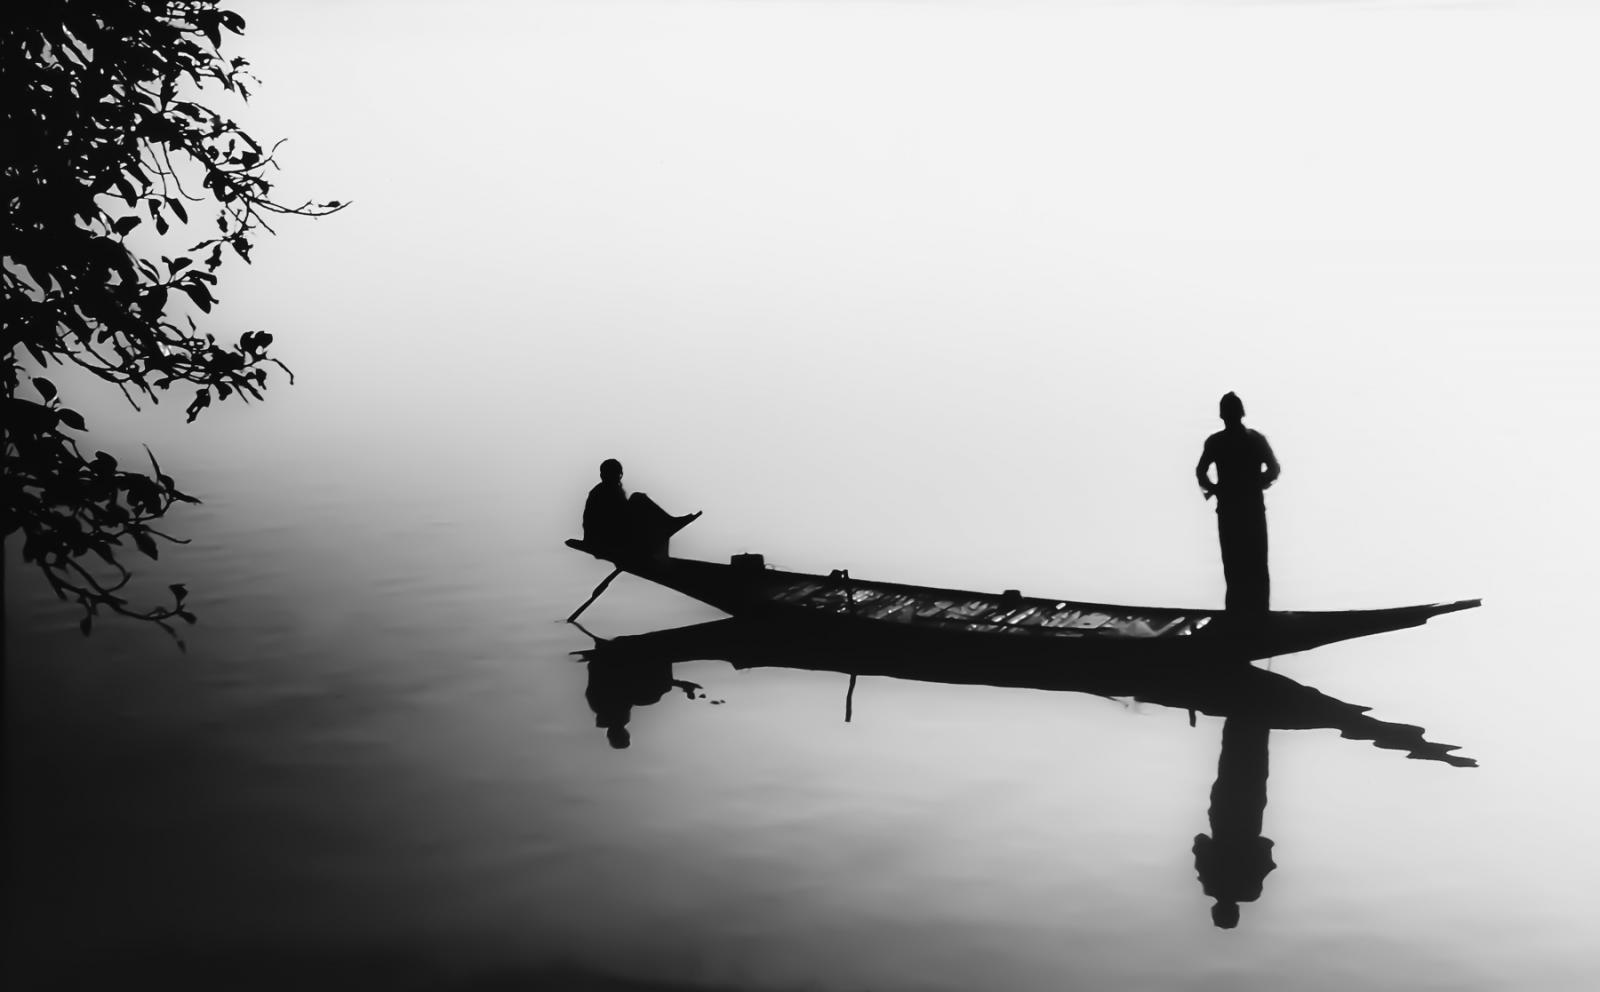 Early morning in the Ganges